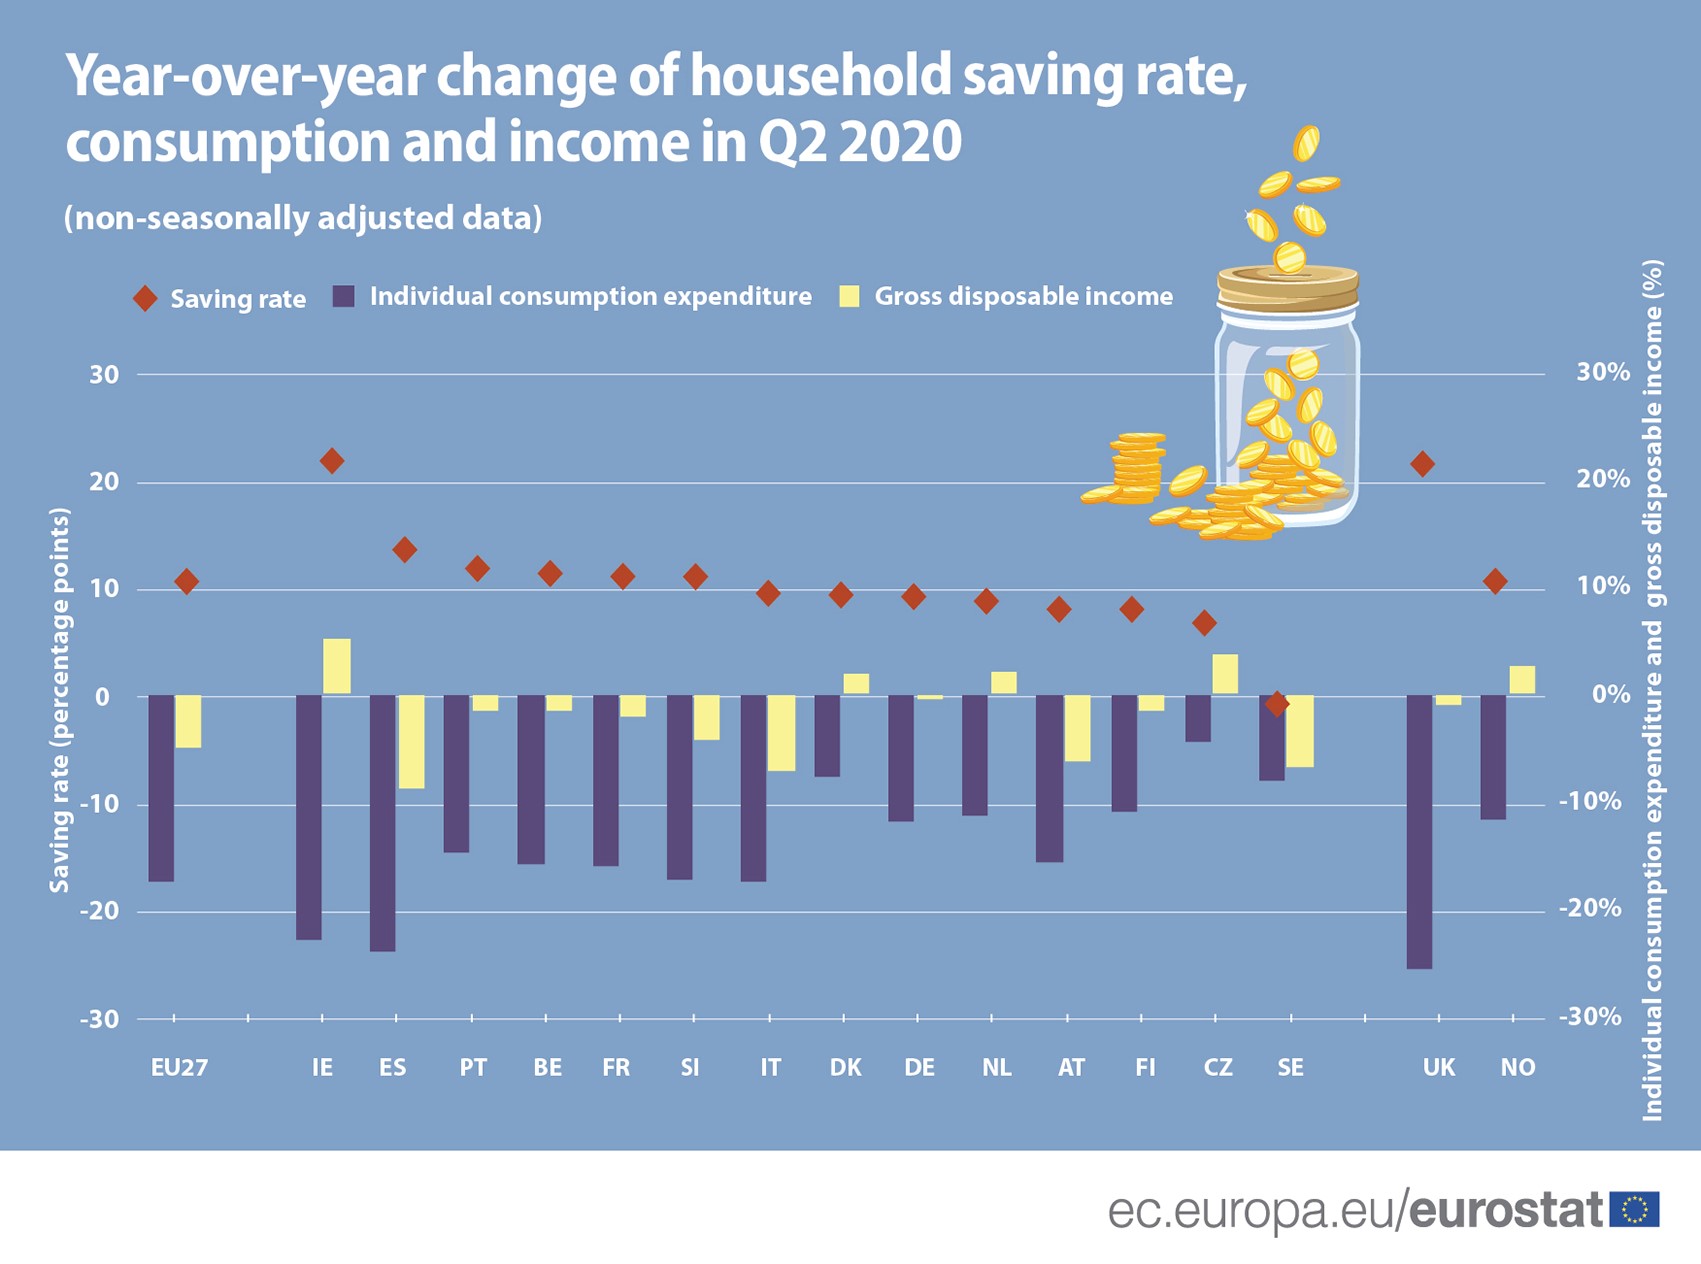 Year-over-year change of household saving rate, consumption and income in Q2 2020